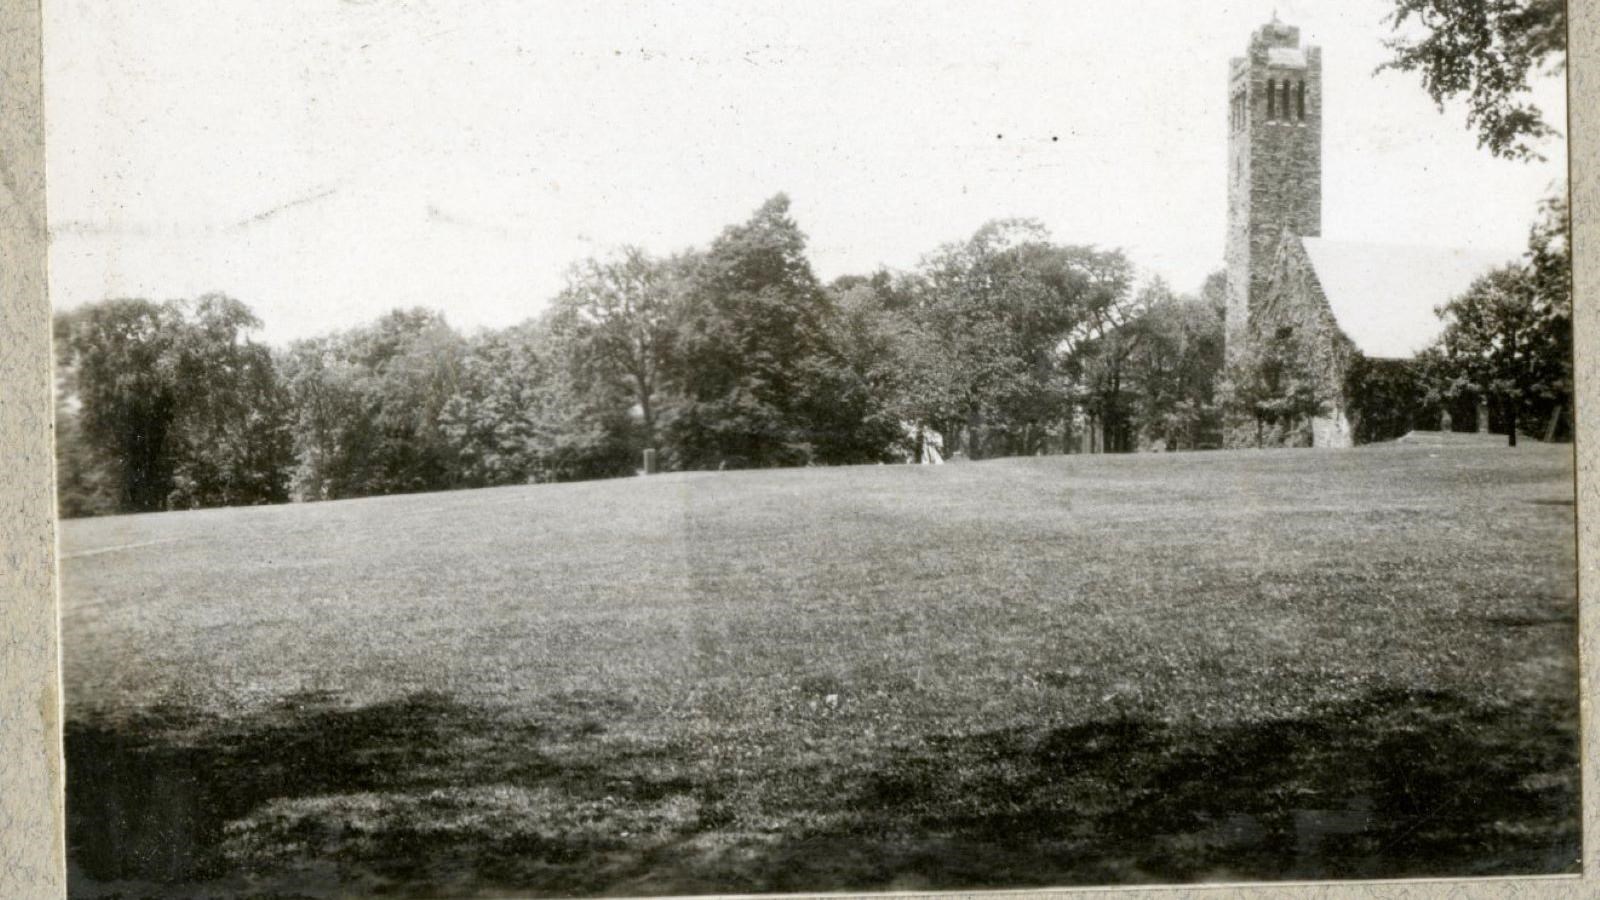 Black and white of grassy open area with trees on the far edge with a large stone tower